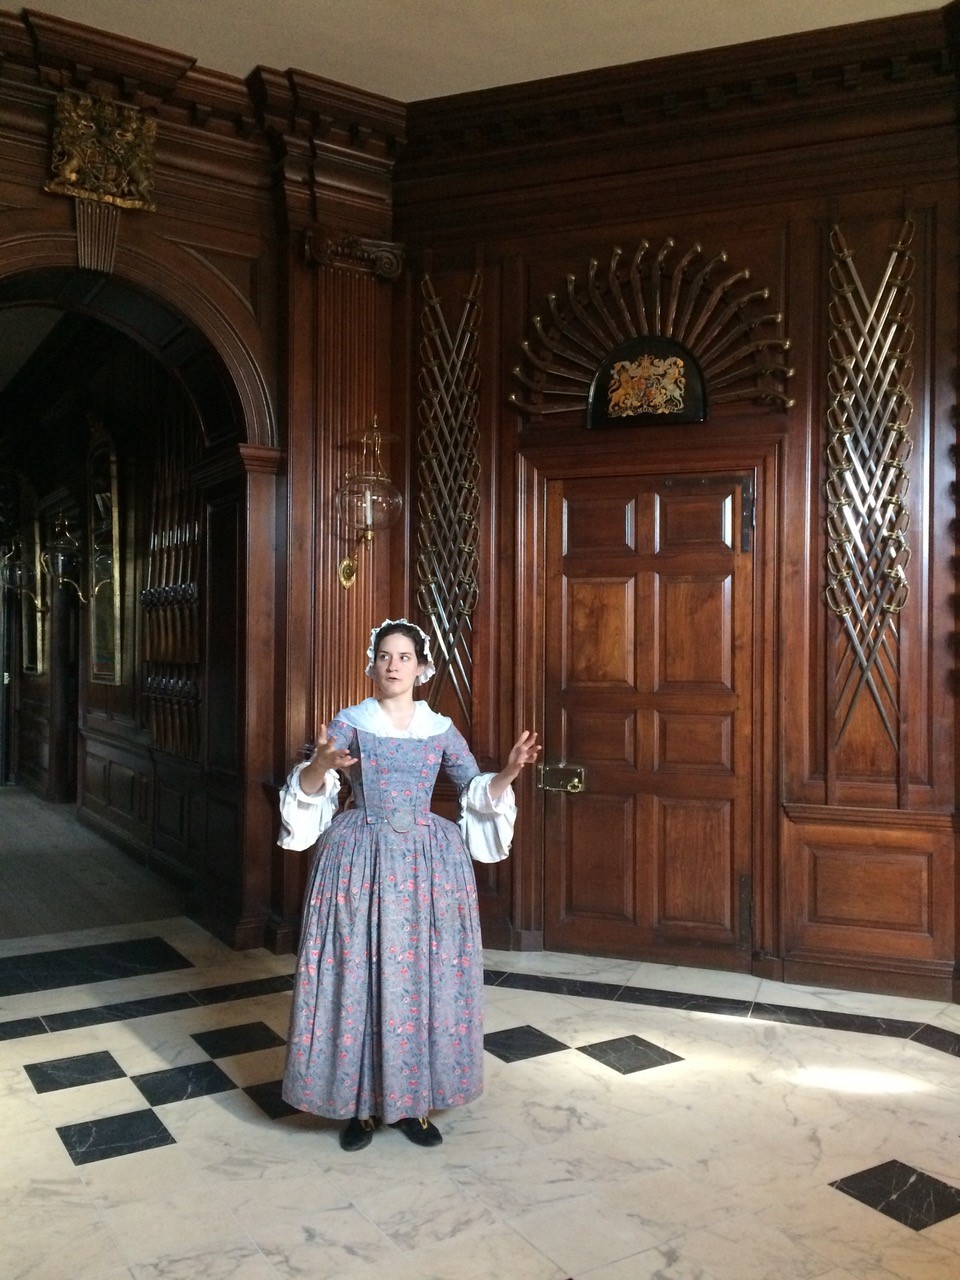 Bryn Athyn College alumna Dara King (’13) guides visitors through the governor’s palace